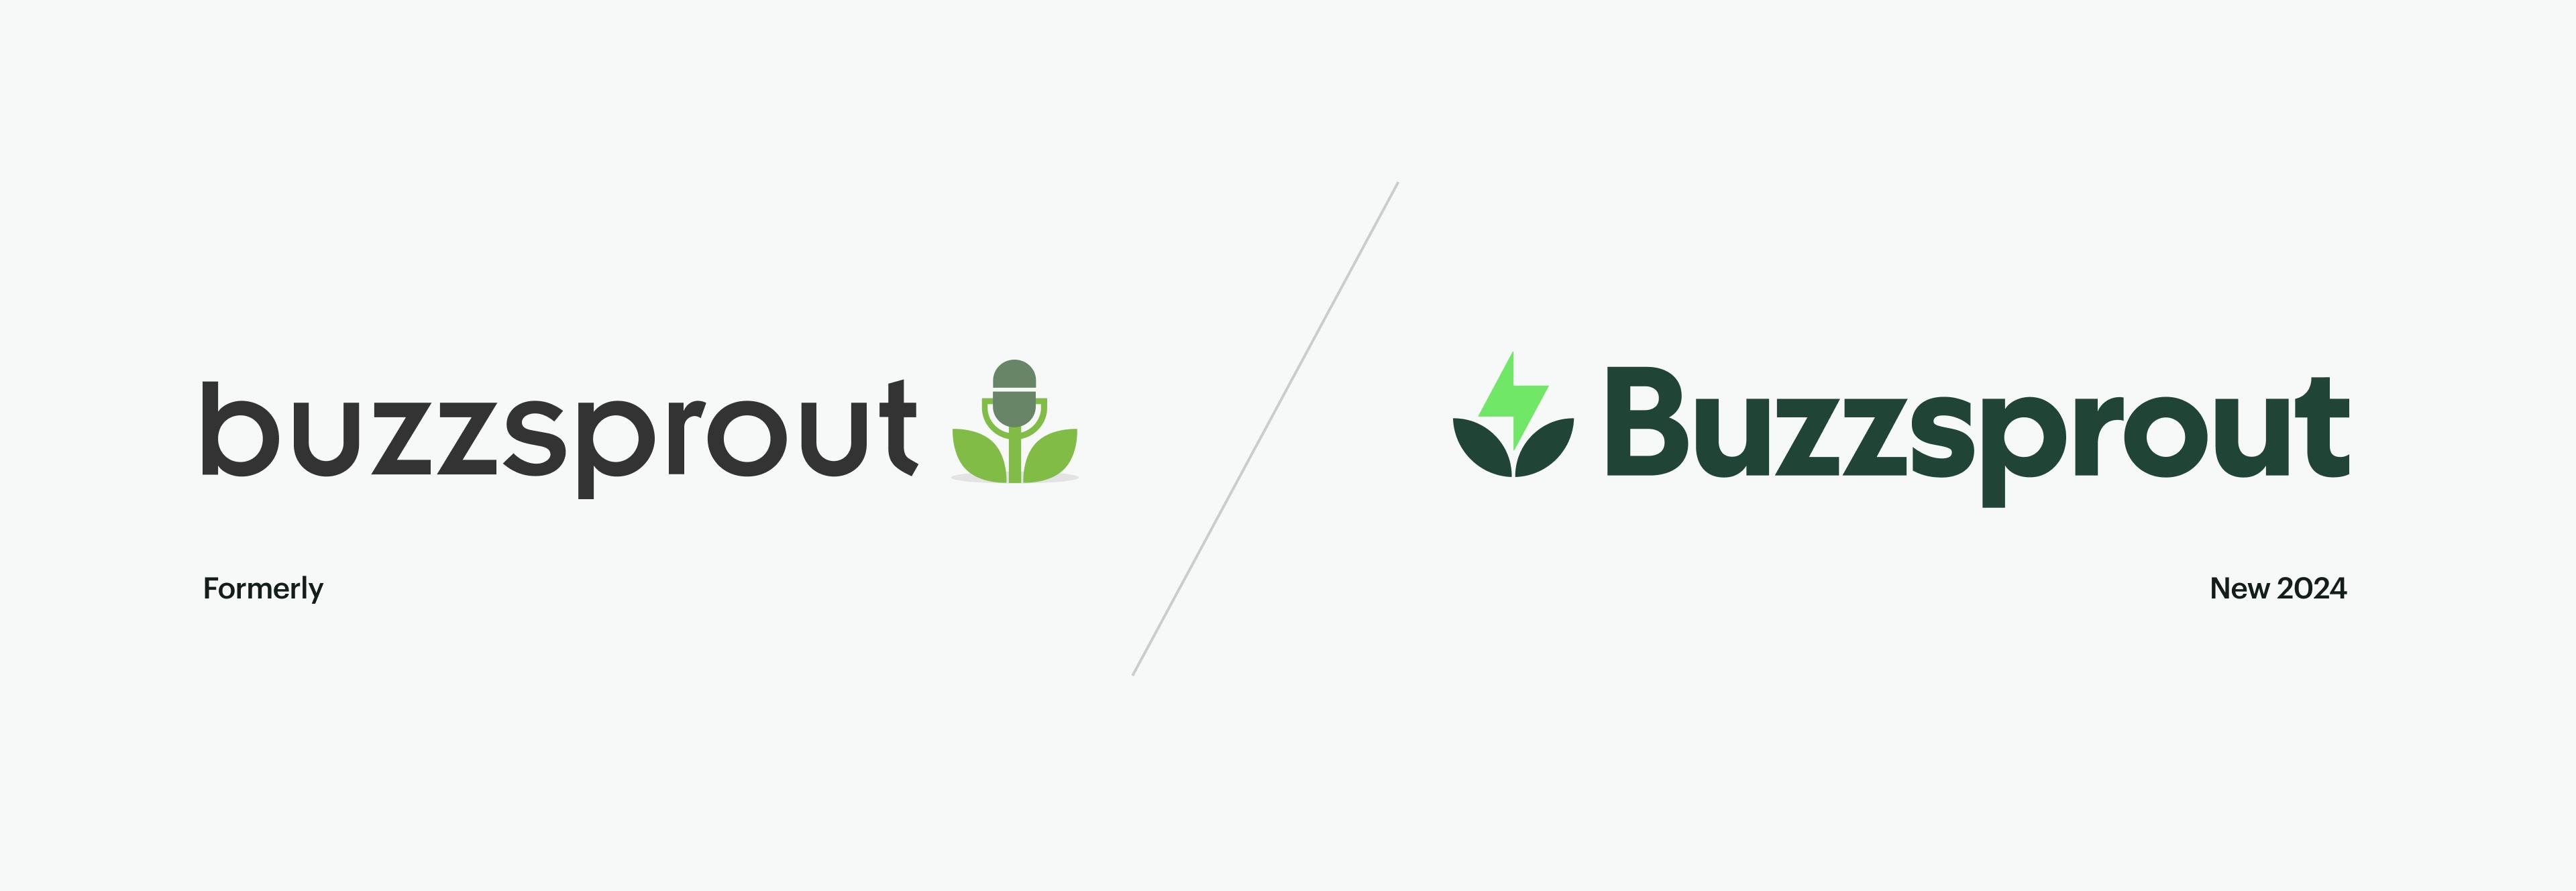 15 years of Buzzsprout